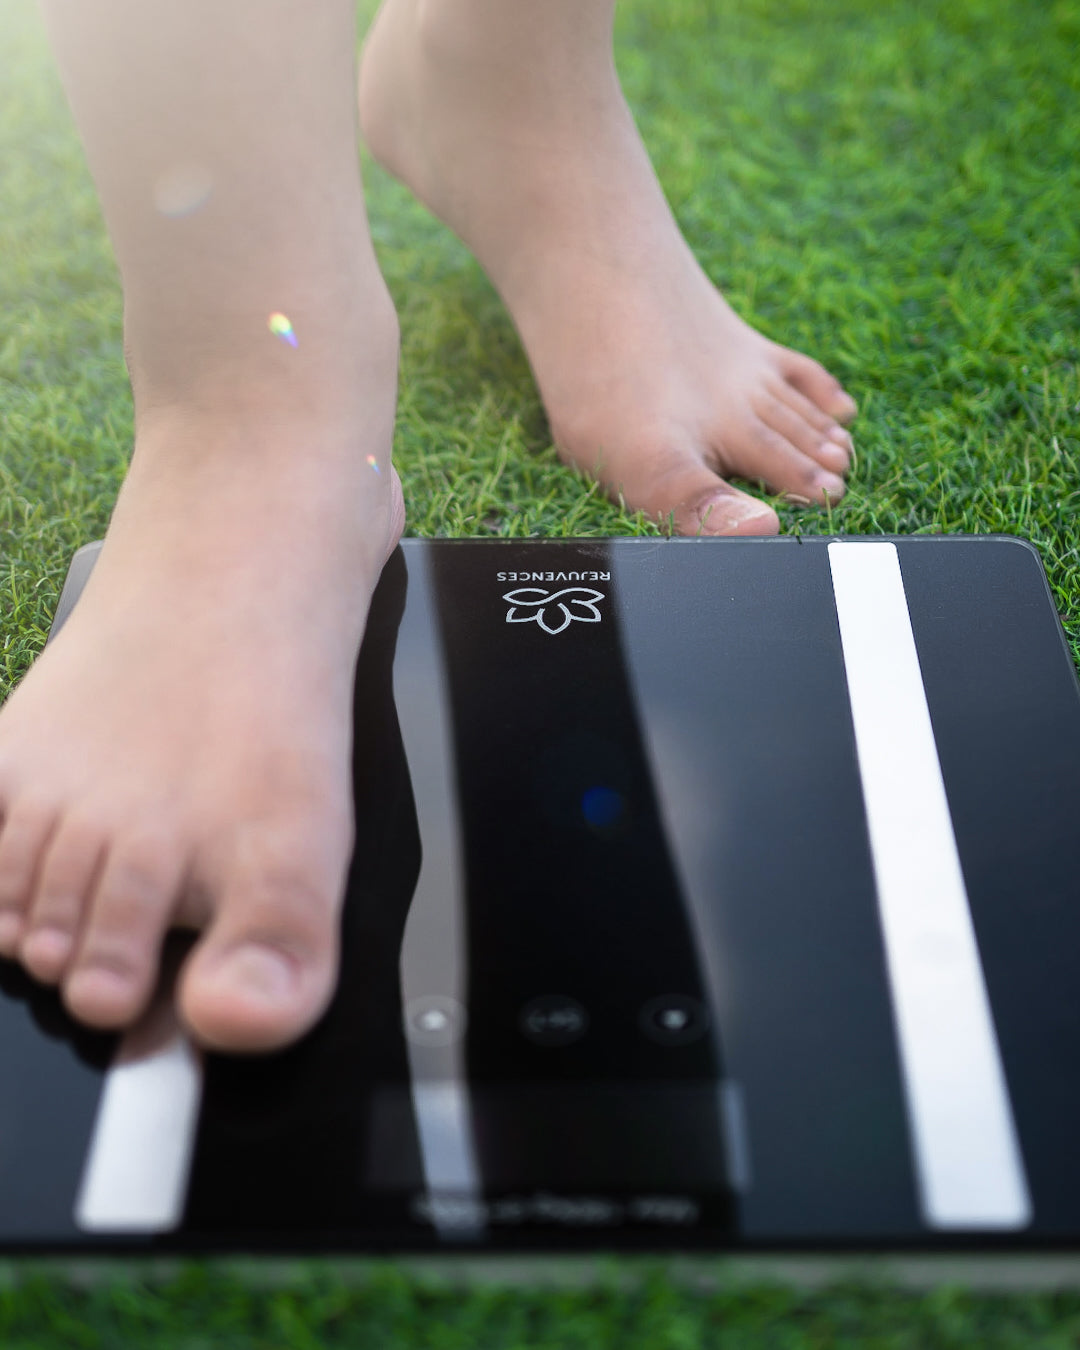 The Top 5 Body Scales for Home Personal Measurement